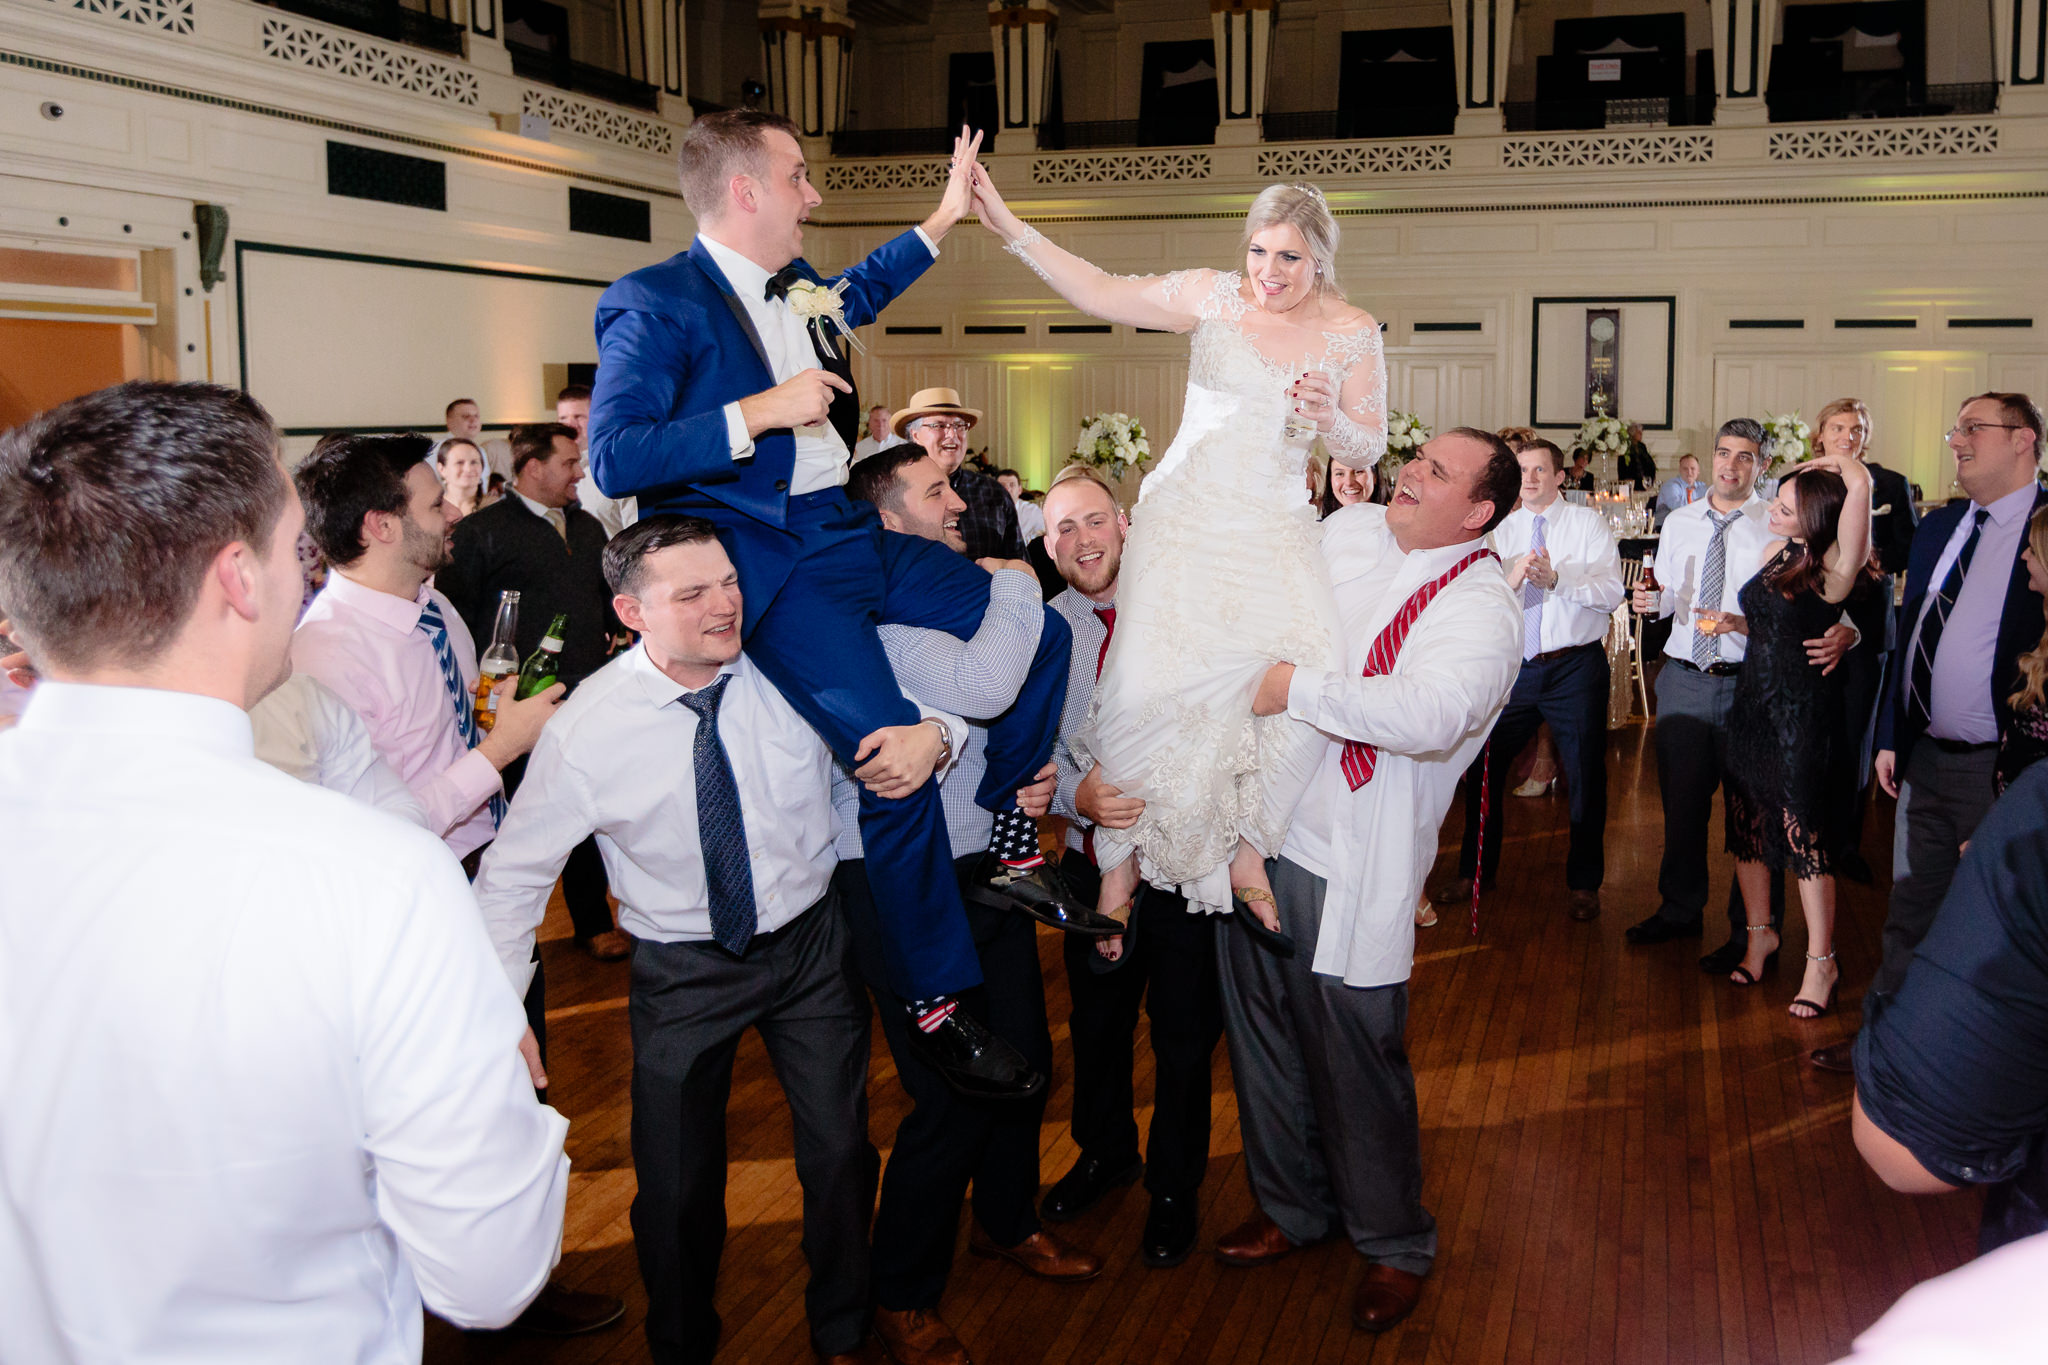 Newlyweds high five at their Soldiers & Sailors wedding